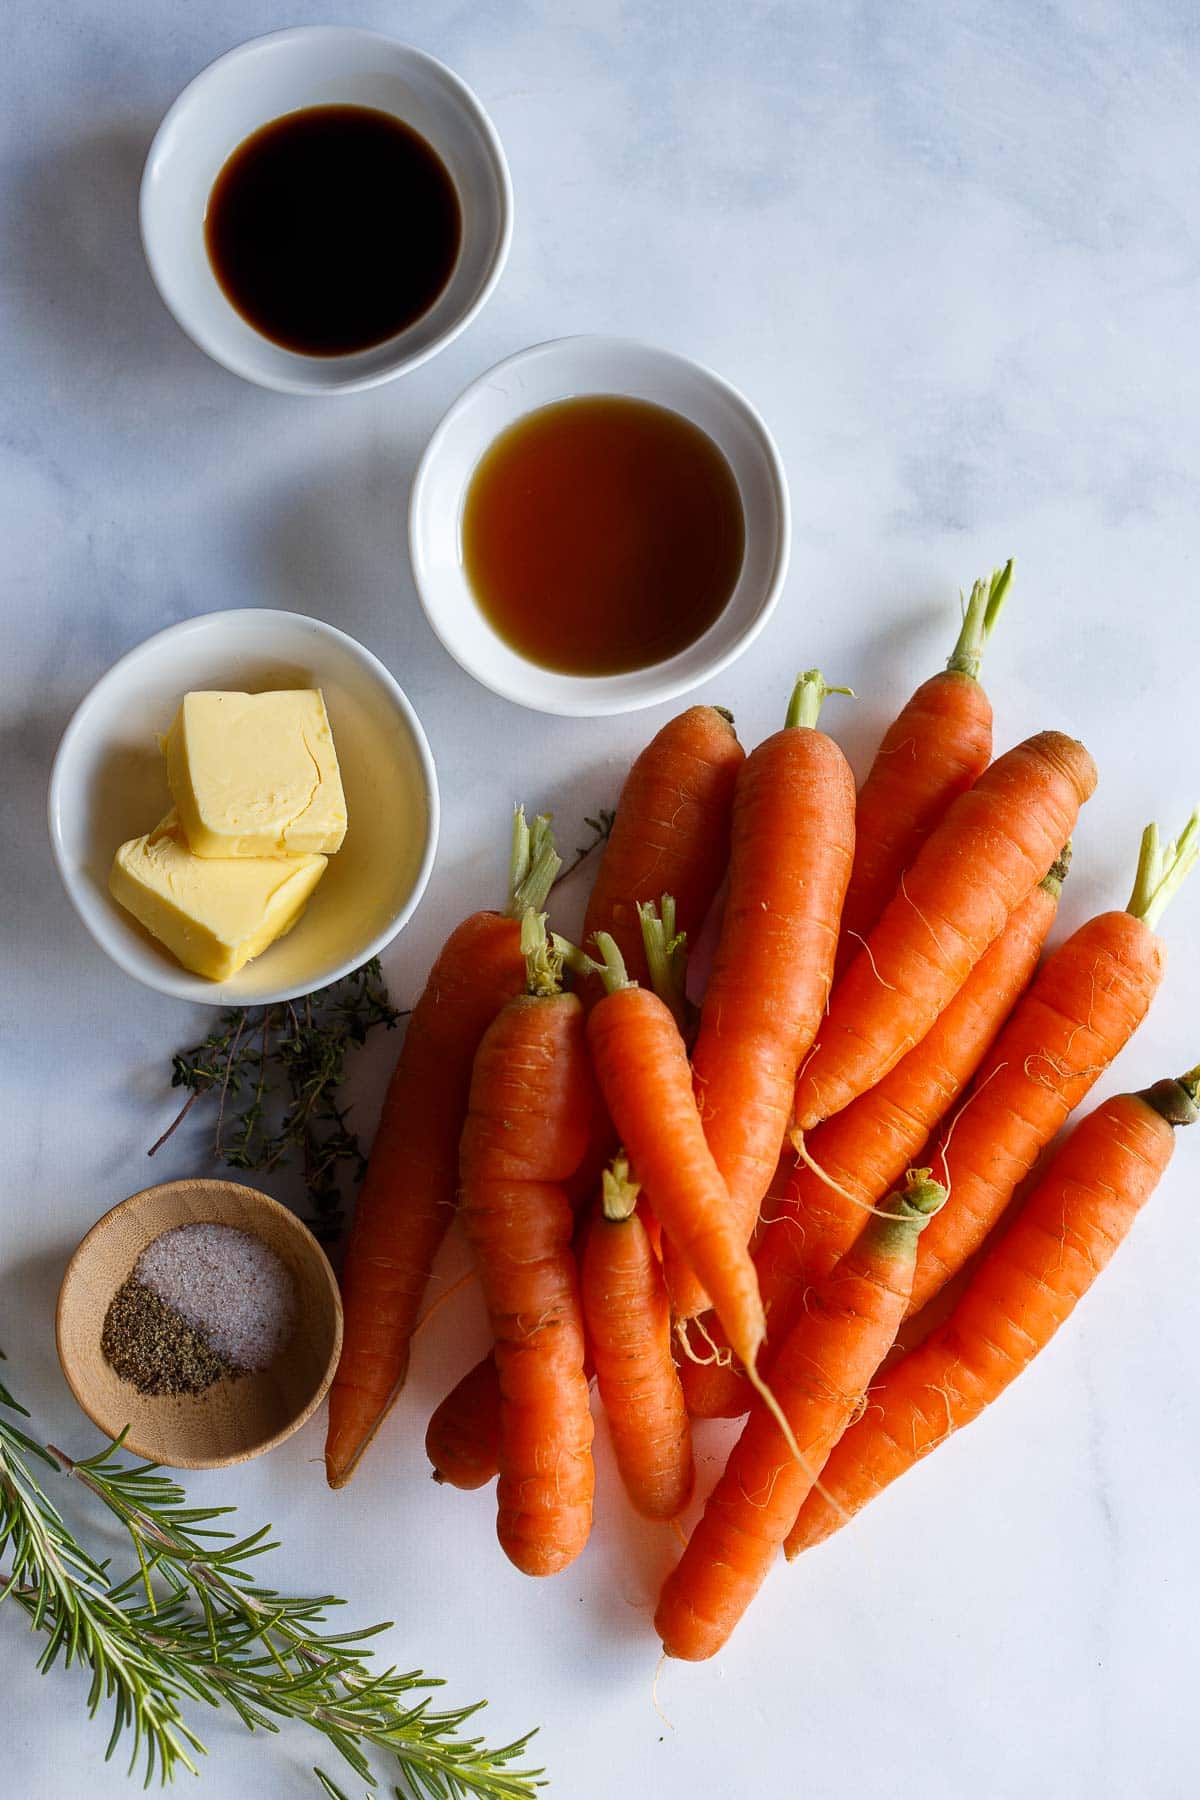 Ingredients for glazed carrots.